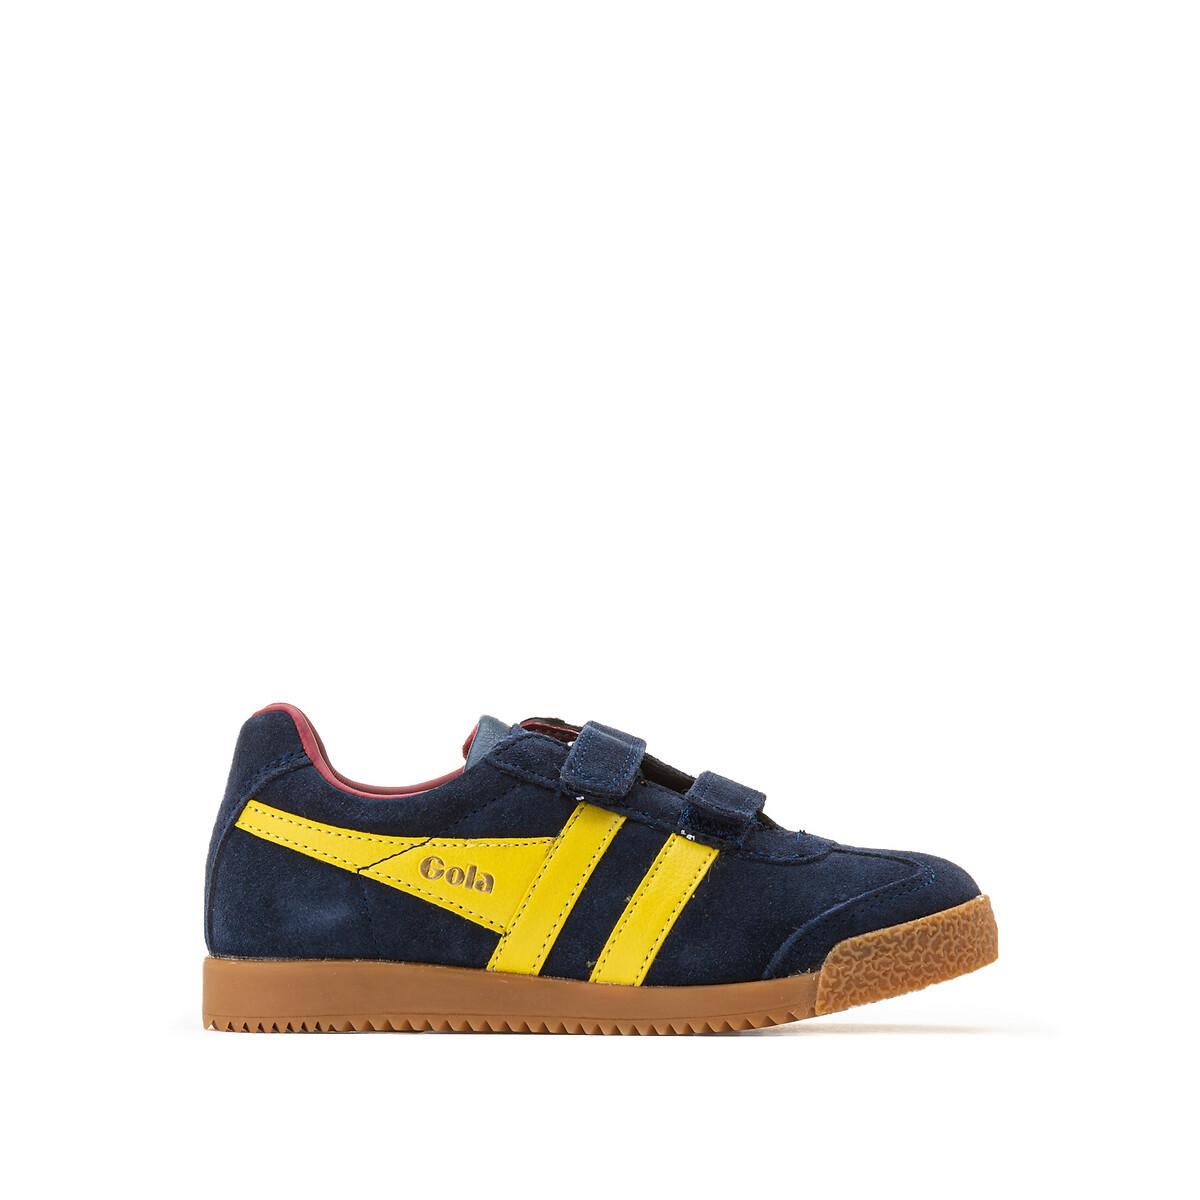 Kids Harrier Velcro Trainers in Leather